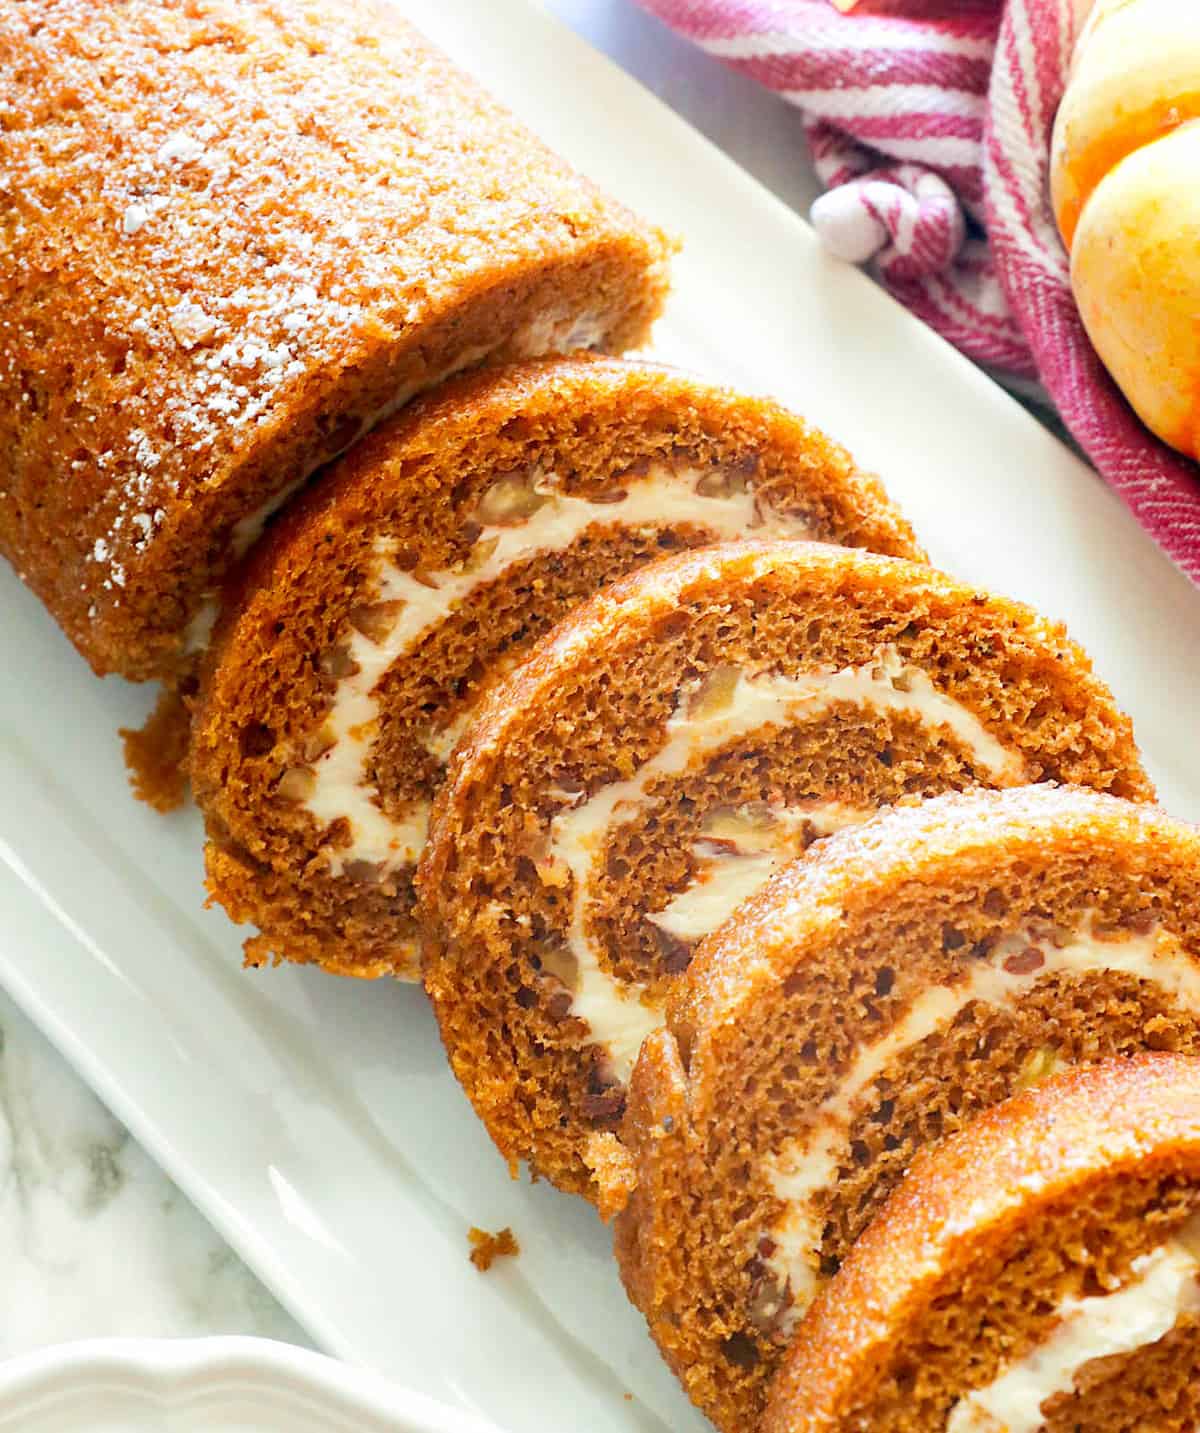 Slicing decadent pumpkin roll for the holidays